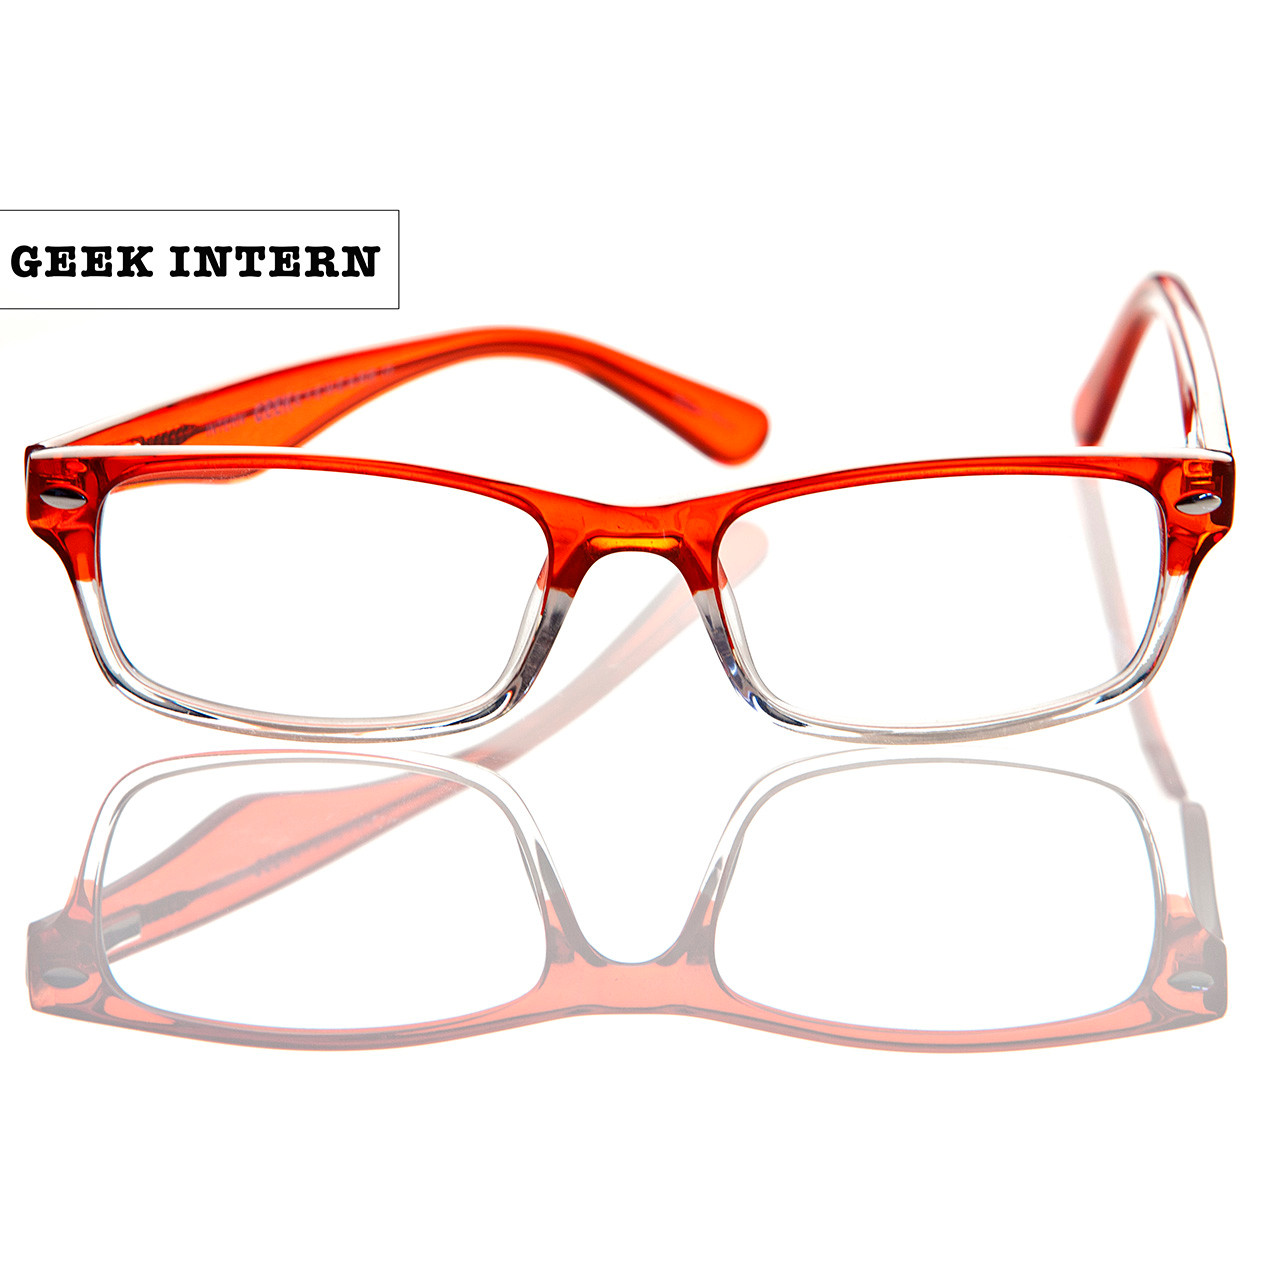 Hip To Be Square: Difference Between Nerd and Hipster Glasses  Nerd  Glasses Fashion – Your Ultimate Guide to Stylish Geek Eyewear